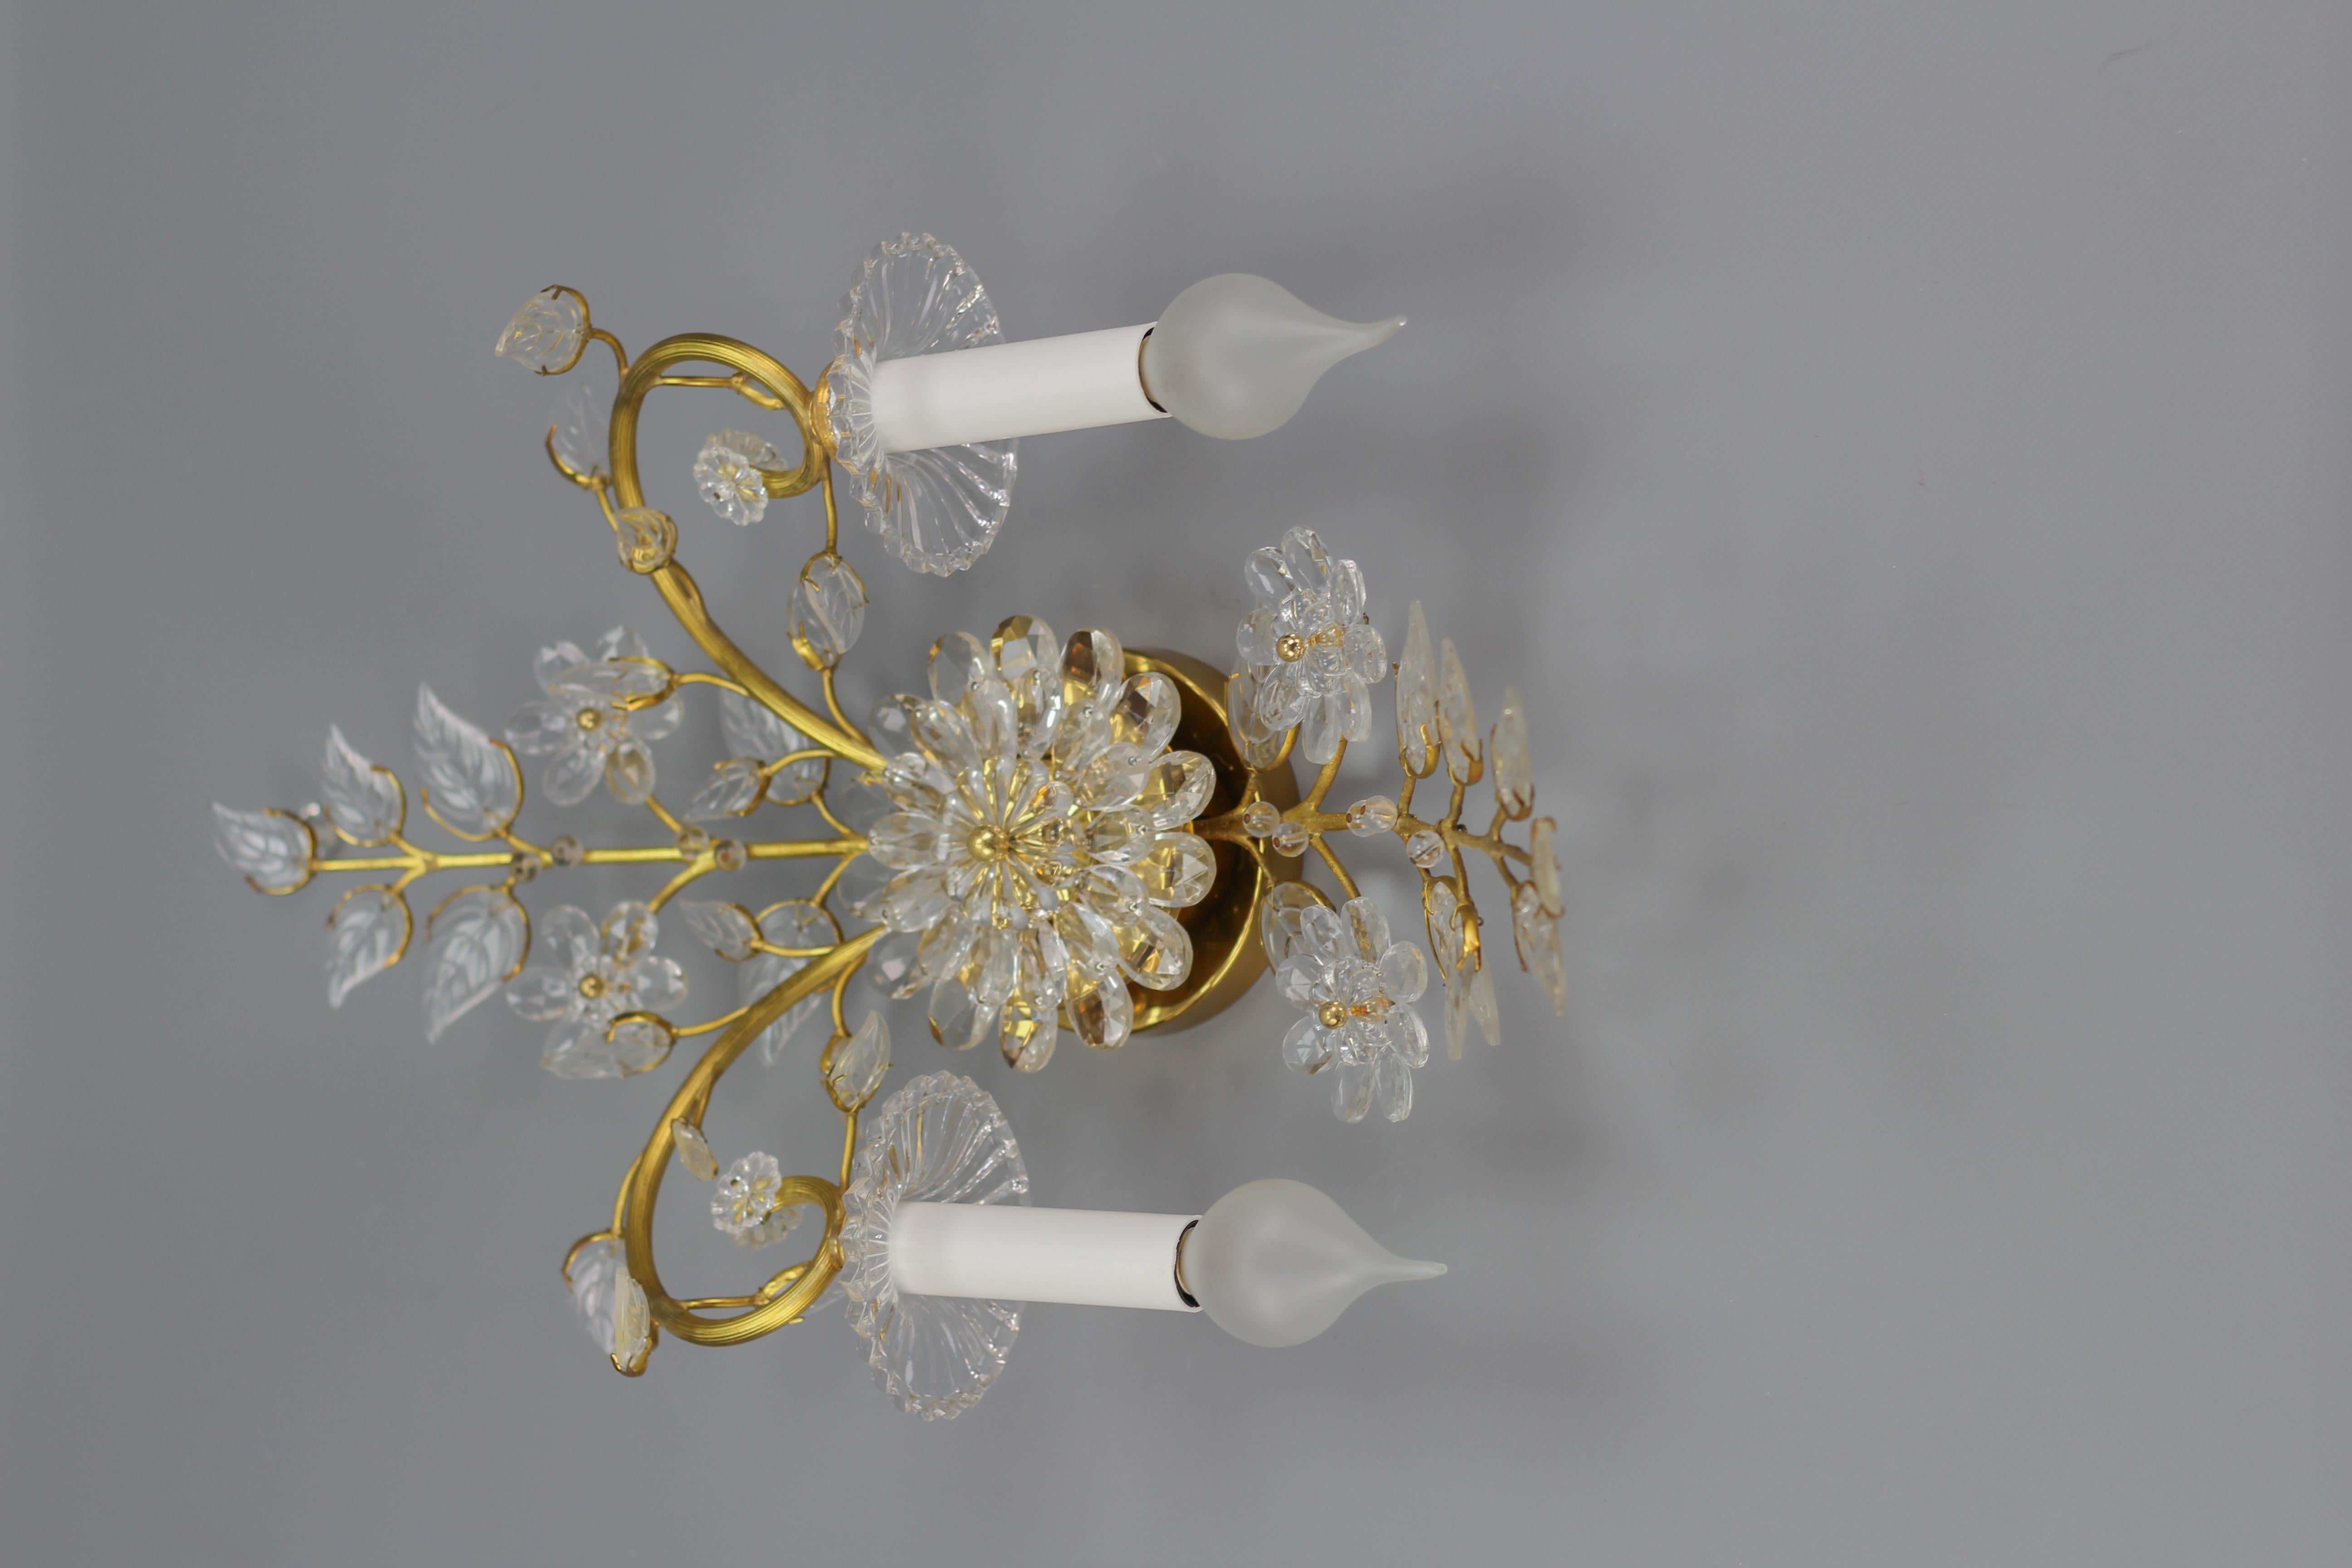 Palme & Walter Crystal and Brass Floral Wall Sconce by Palwa, Germany, 1960s For Sale 3